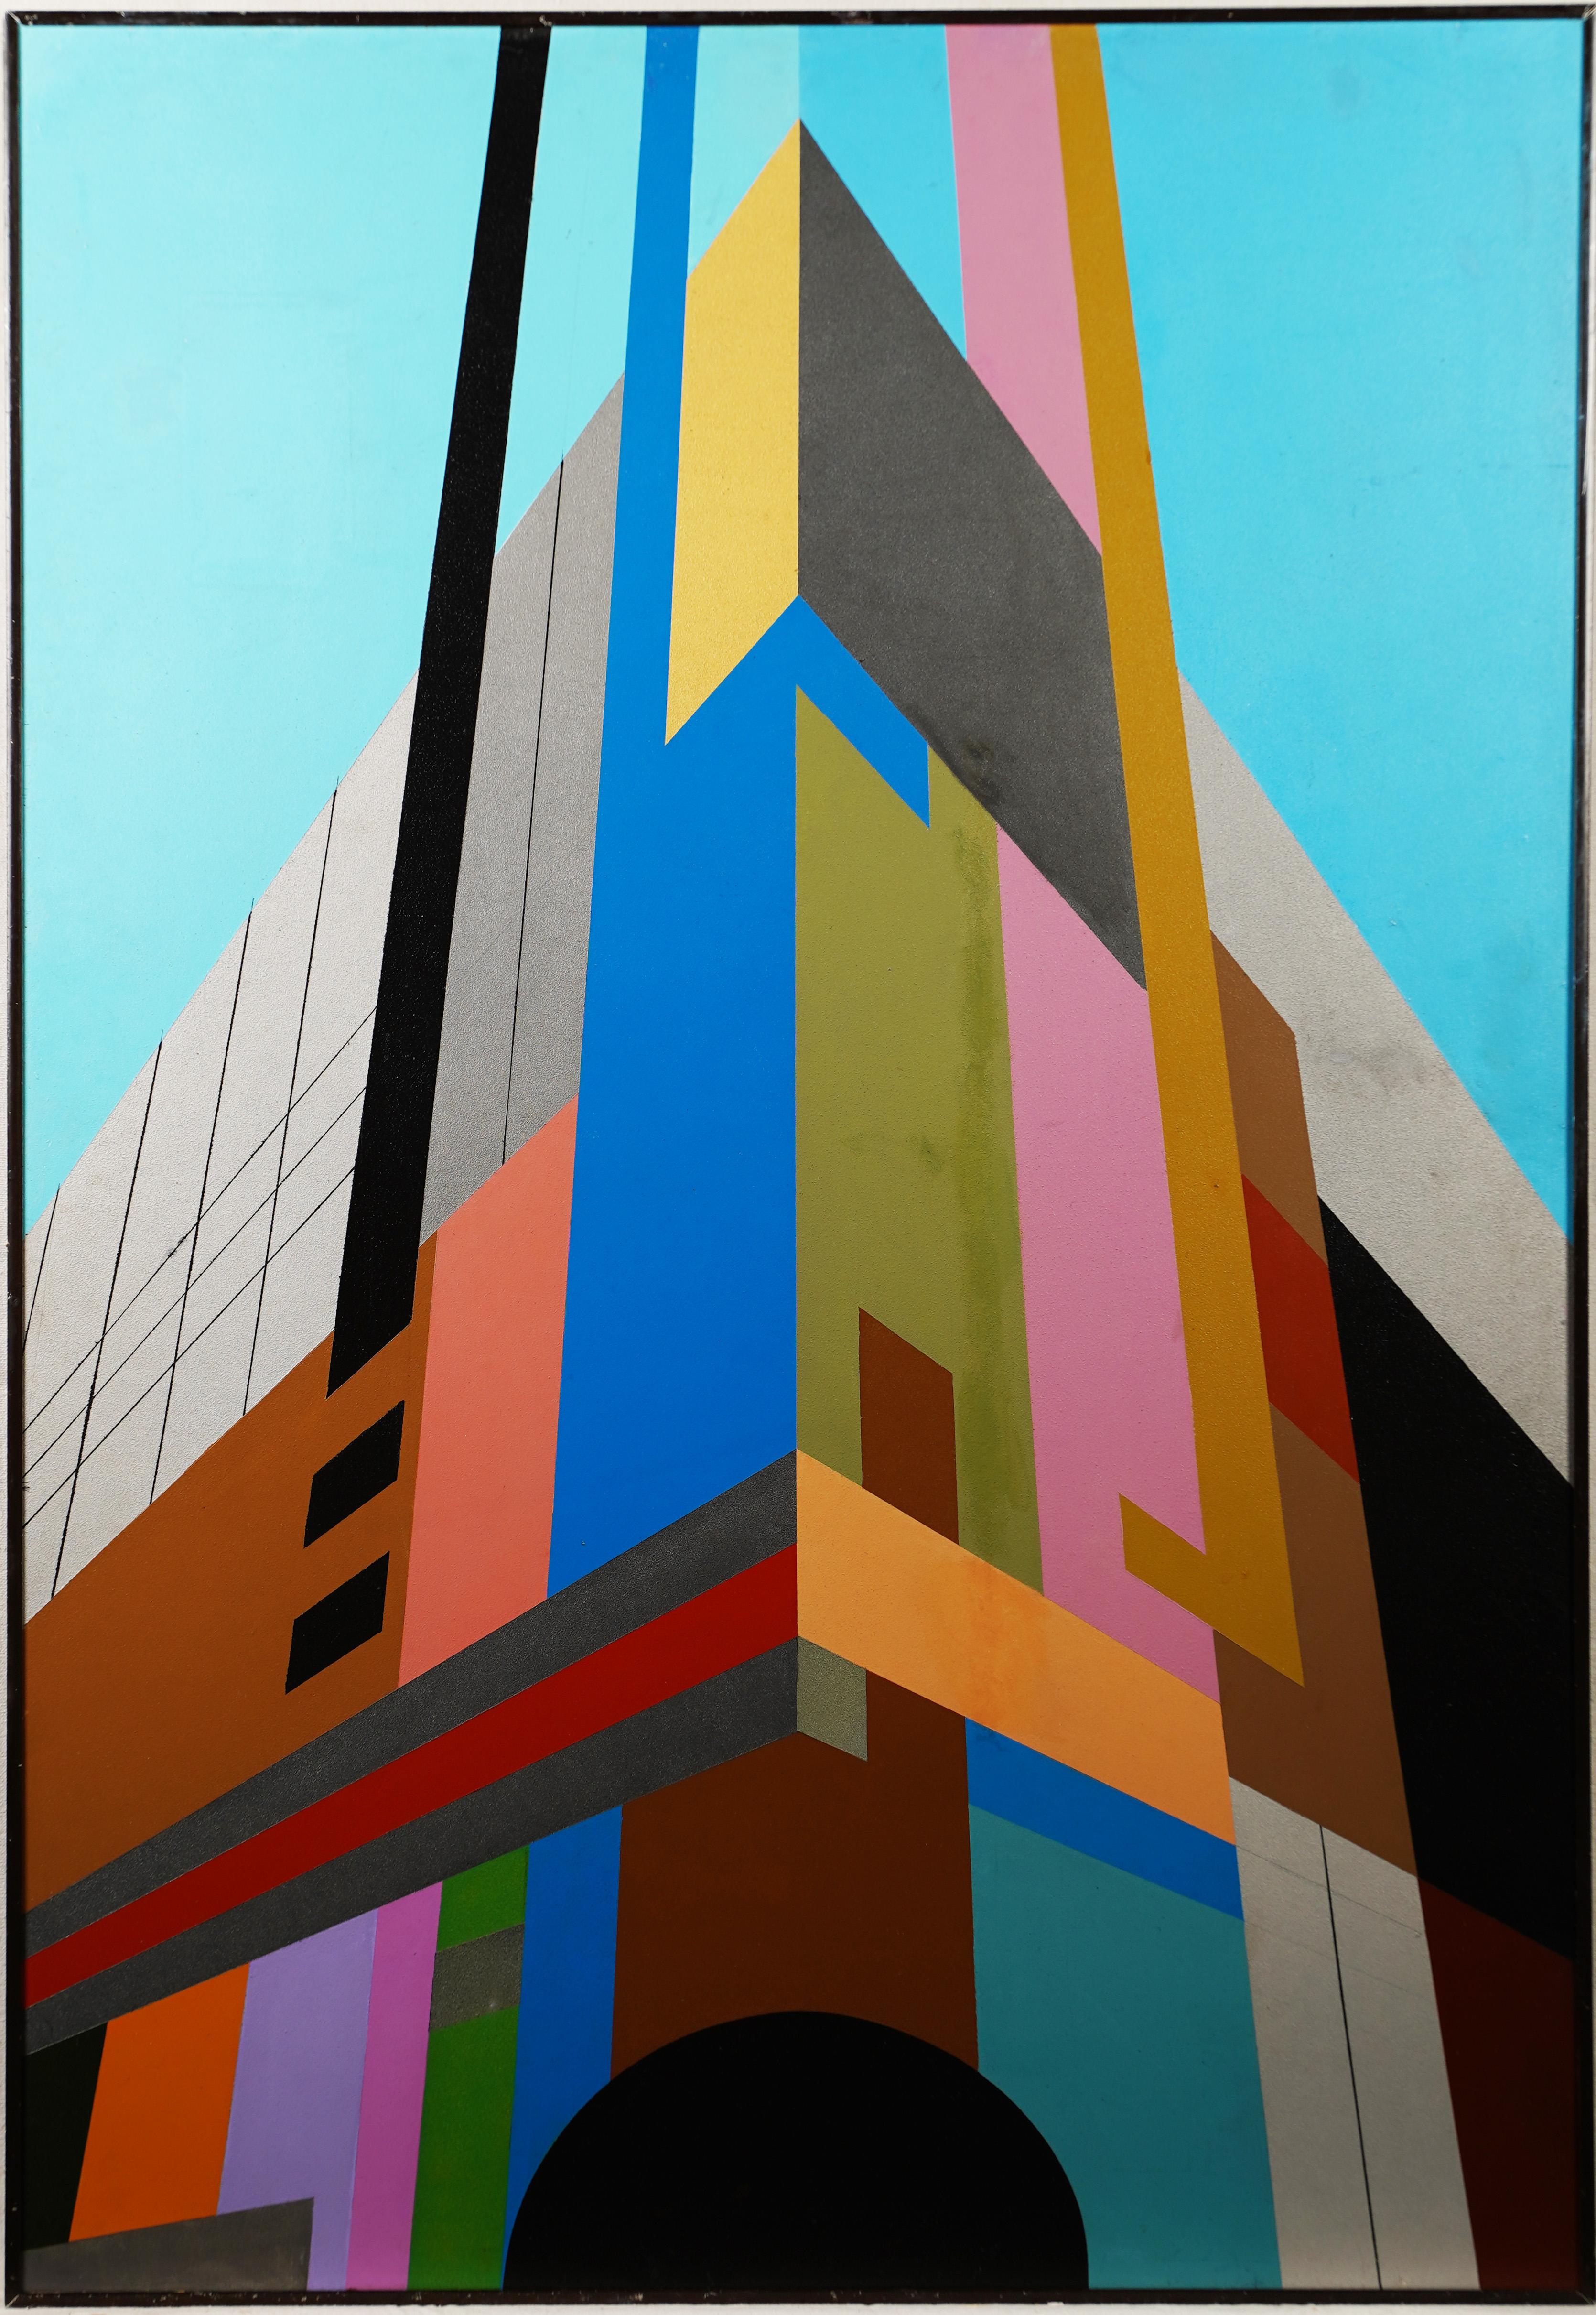 Unknown Landscape Painting - Large Modernist New York City Geometric Architectural Abstract Oil Painting